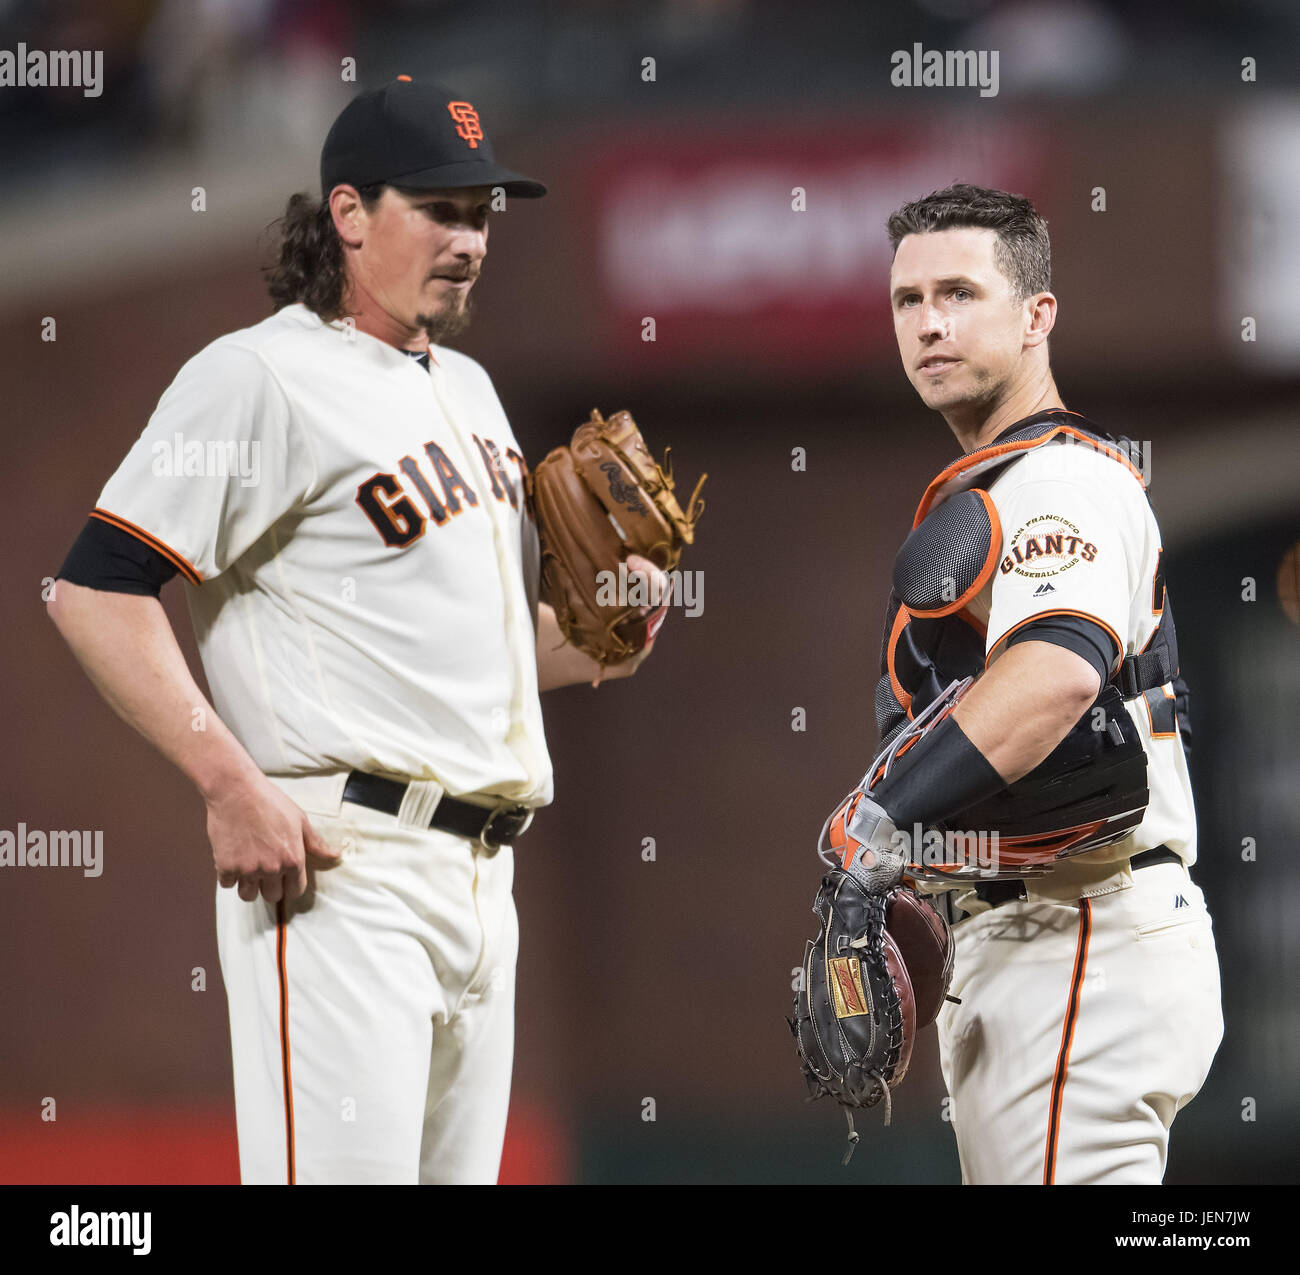 San Francisco, California, USA. 26th June, 2017. San Francisco Giants catcher Buster Posey (28) looks to the dugout while meeting with San Francisco Giants starting pitcher Jeff Samardzija (29) at the mound, during a MLB baseball game between the Colorado Rockies and the San Francisco Giants on LGBT Night at AT&T Park in San Francisco, California. Valerie Shoaps/CSM/Alamy Live News Stock Photo